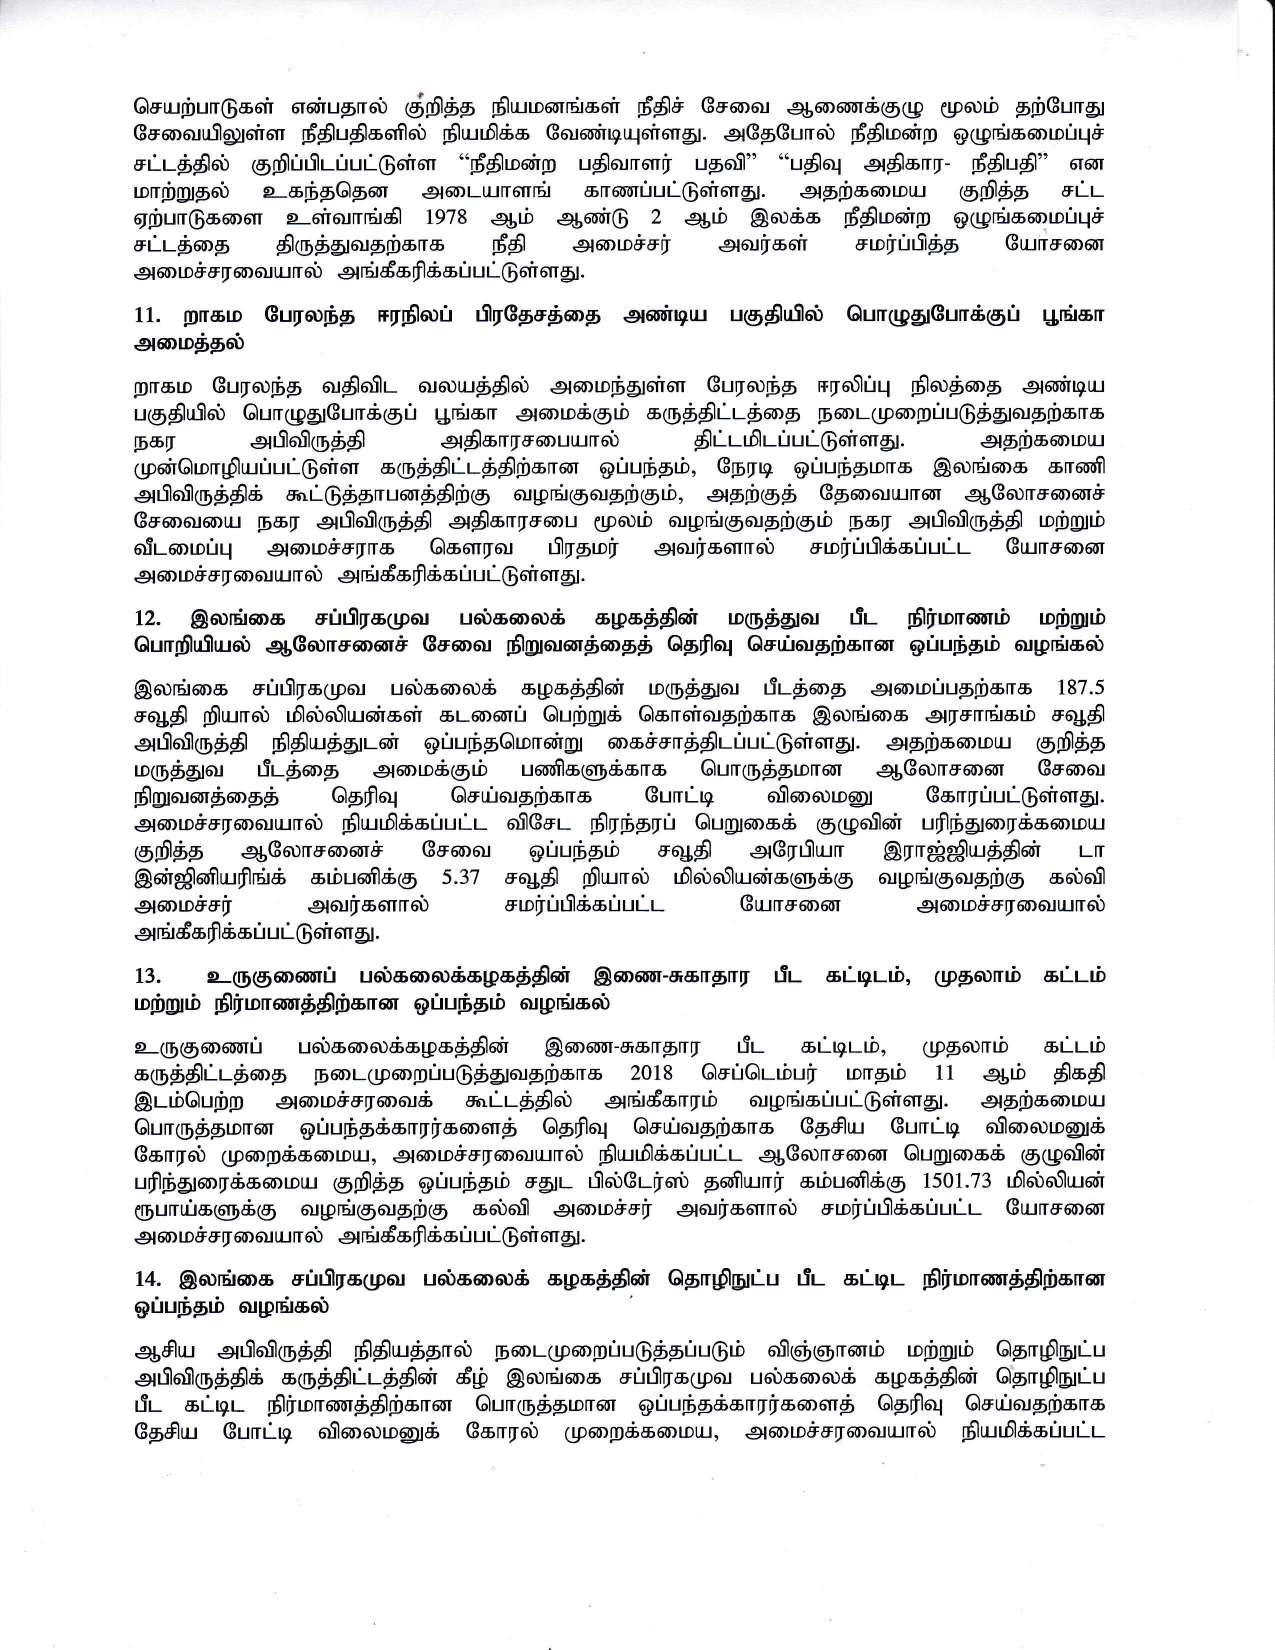 Cabinet Decsion on 09.11.2020 Tamil page 005